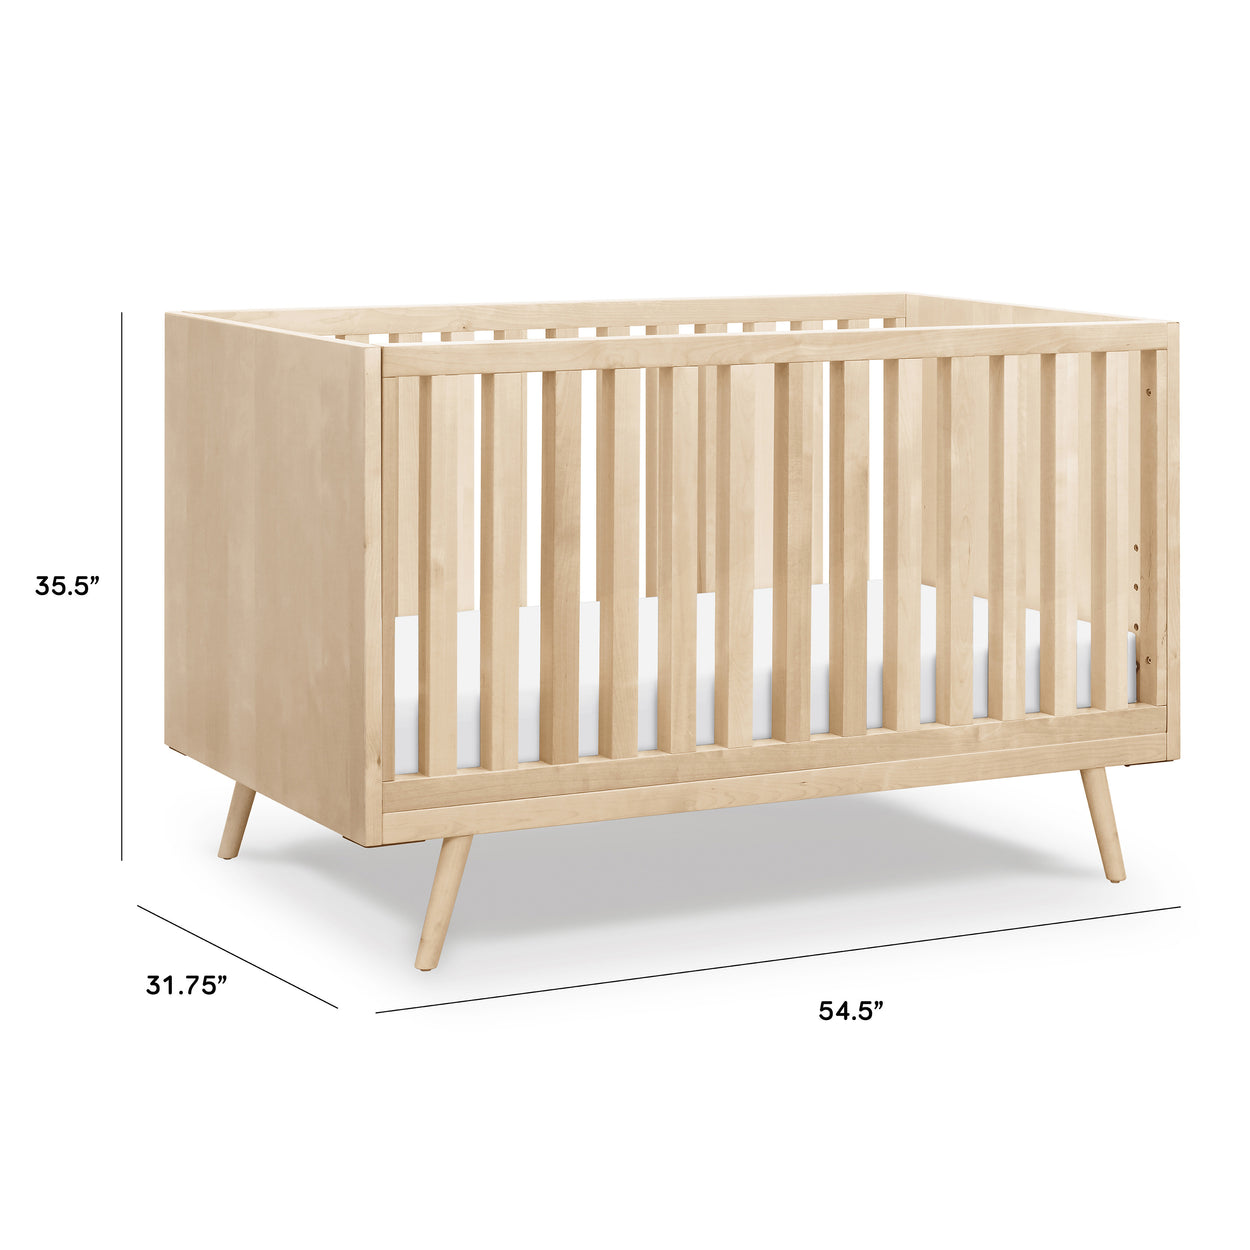 US0310BR,Nifty Timber 3-In-1 Crib in Natural Birch